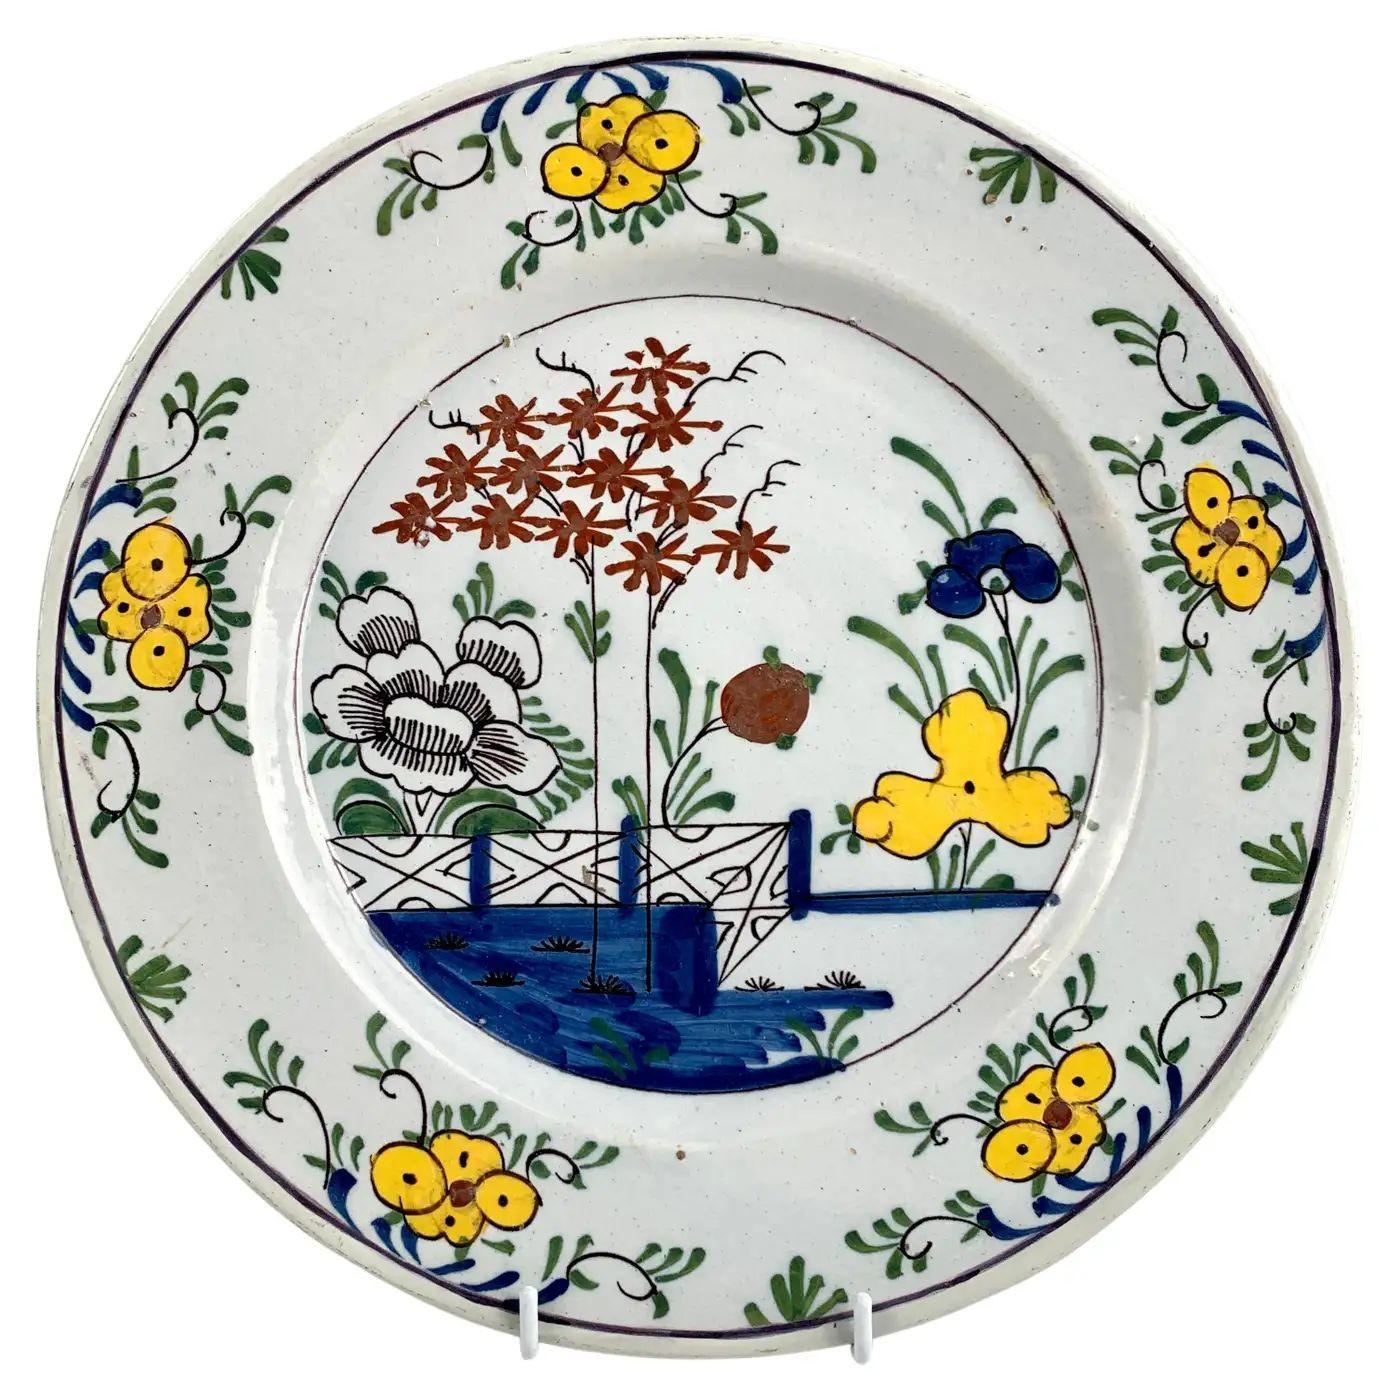 This group of five hand painted Dutch Delft polychrome plates makes a lovely set.
Each plate features a flower-filled garden scene in the center with predominant blue, green, and yellow.
Touches of orange, iron red, and manganese add to the visual